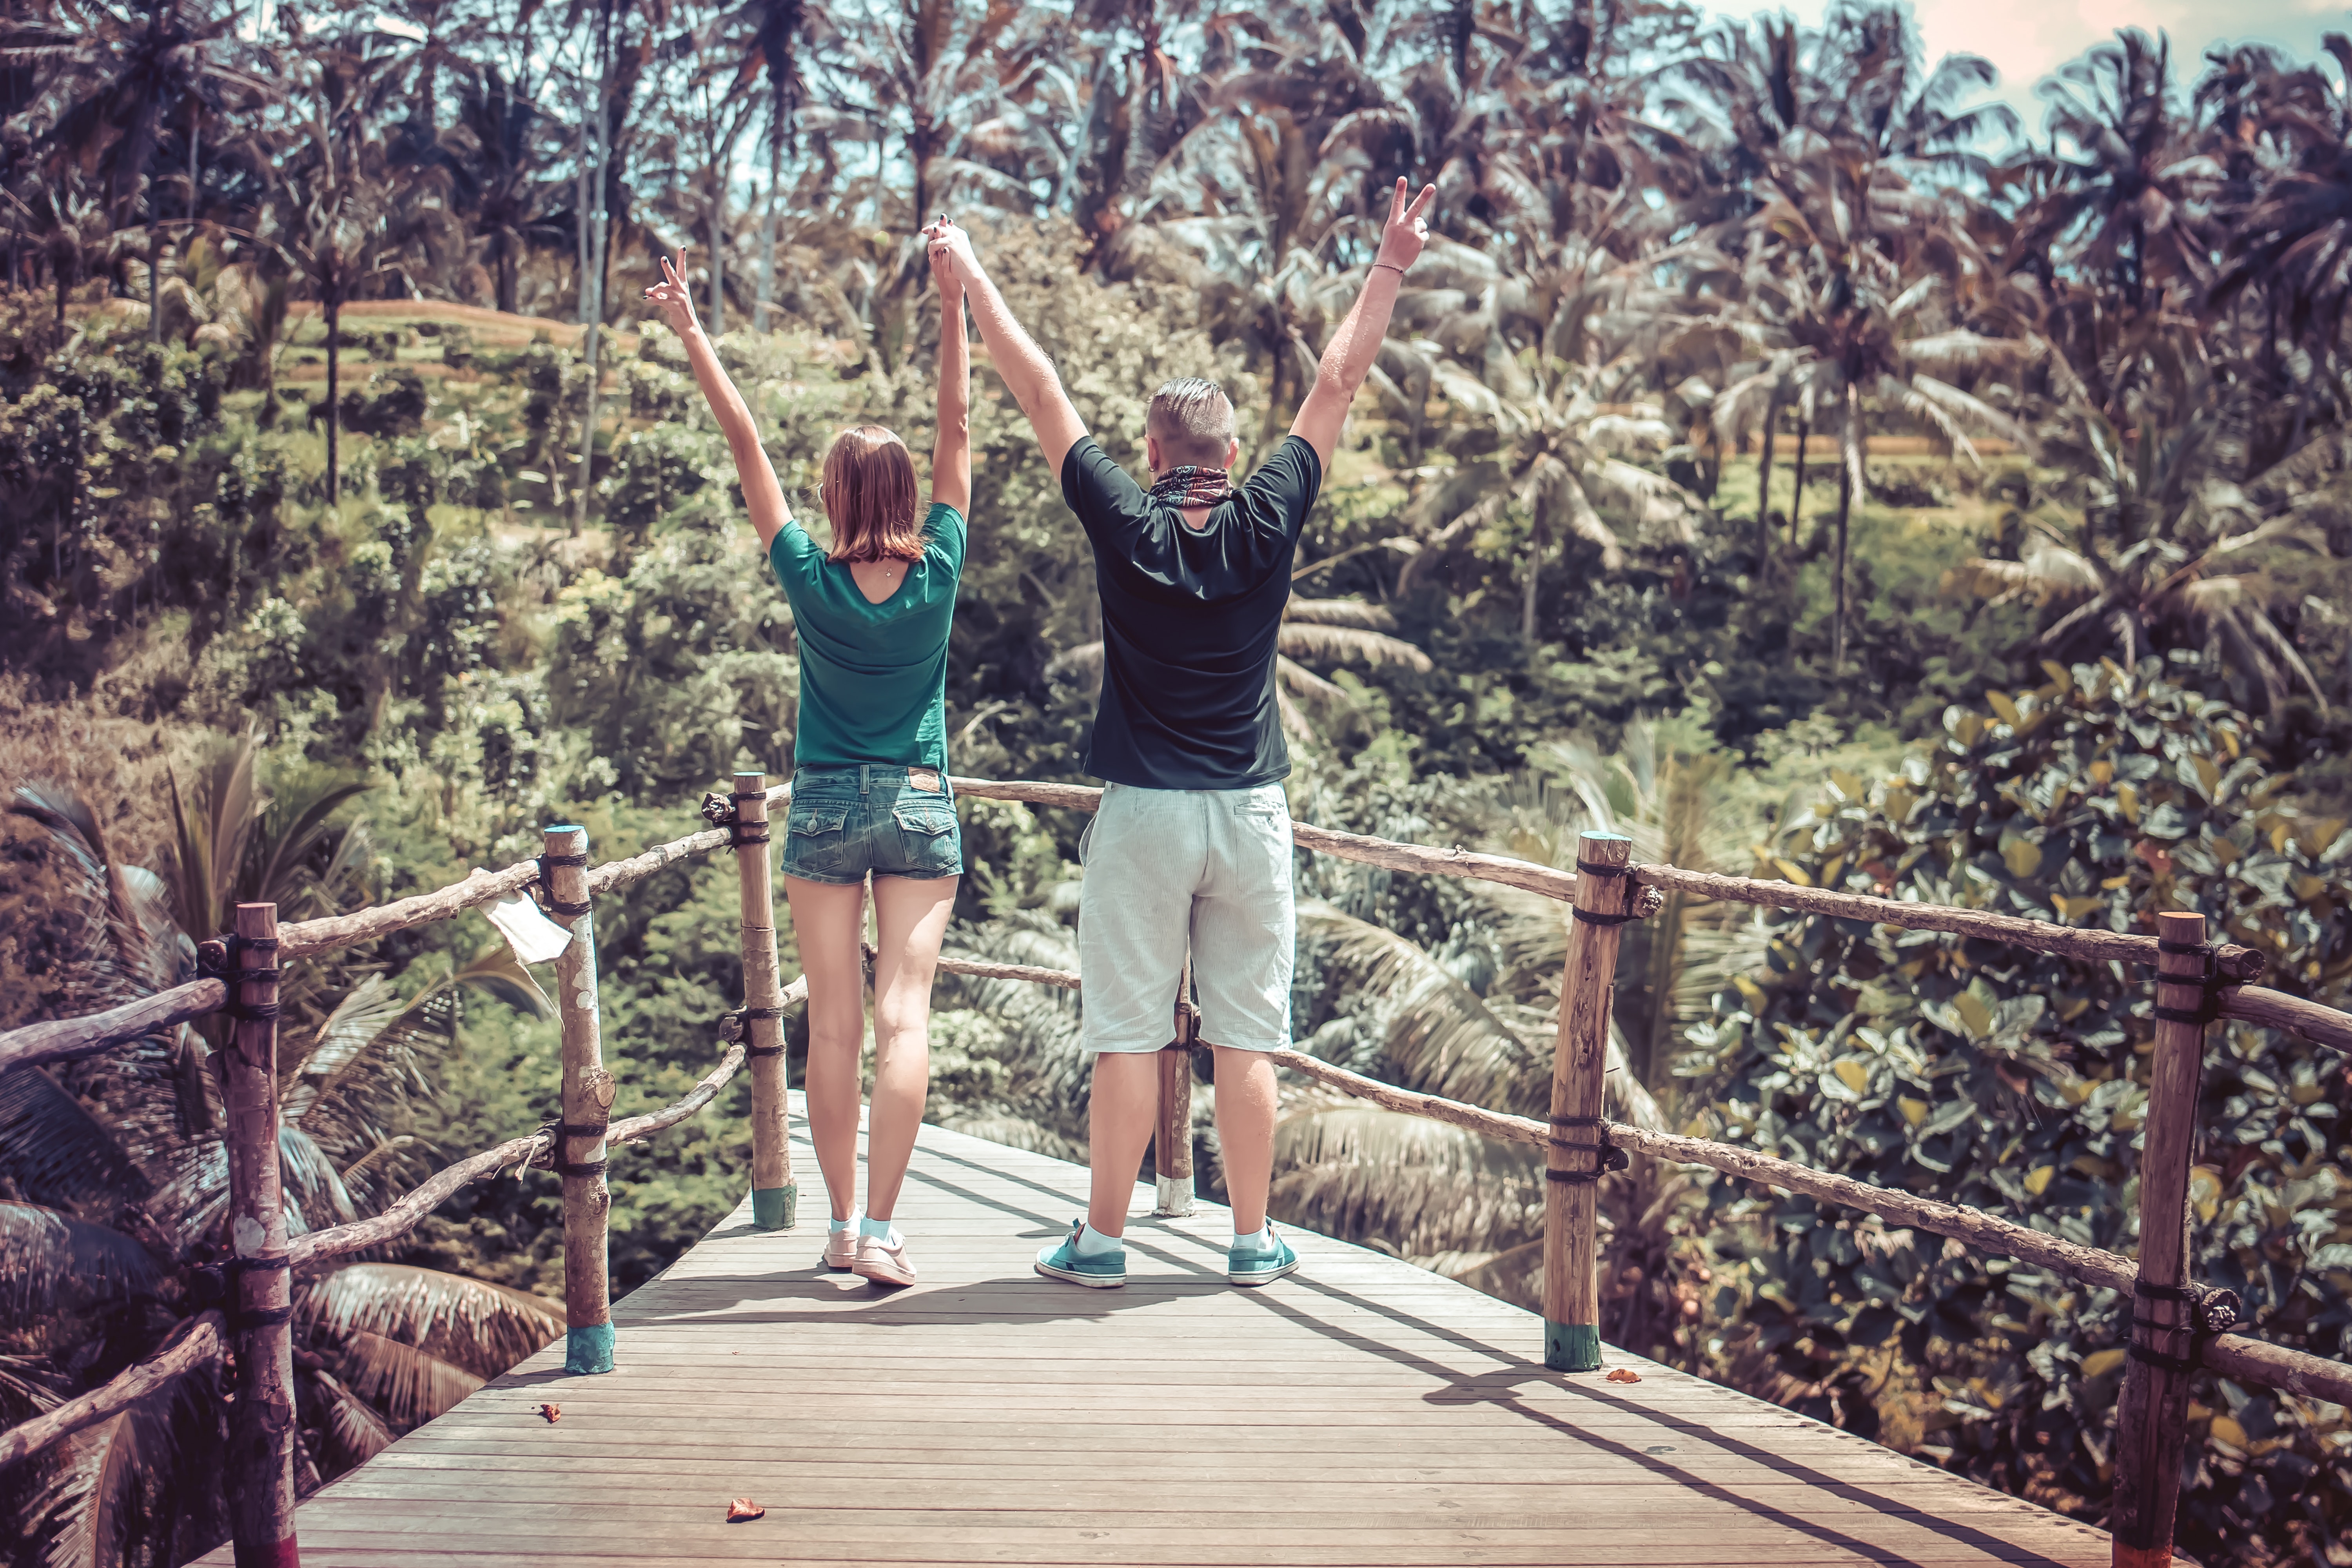 Man Wearing Black Shirt Beside a Woman in Green Shirt Raising Their Hands in the Air, Adult, Togetherness, Palm trees, People, HQ Photo